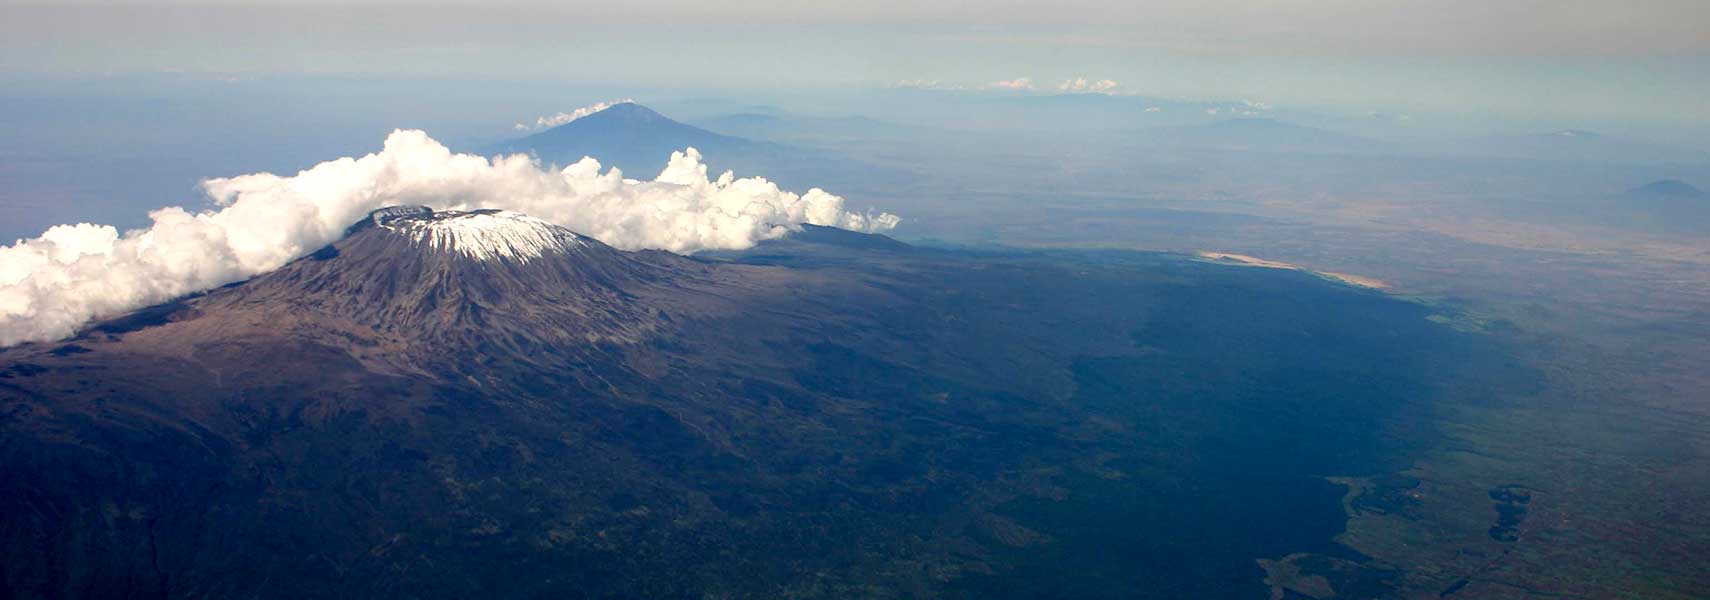 Pictures of Mount Kilimanjaro from our image gallery